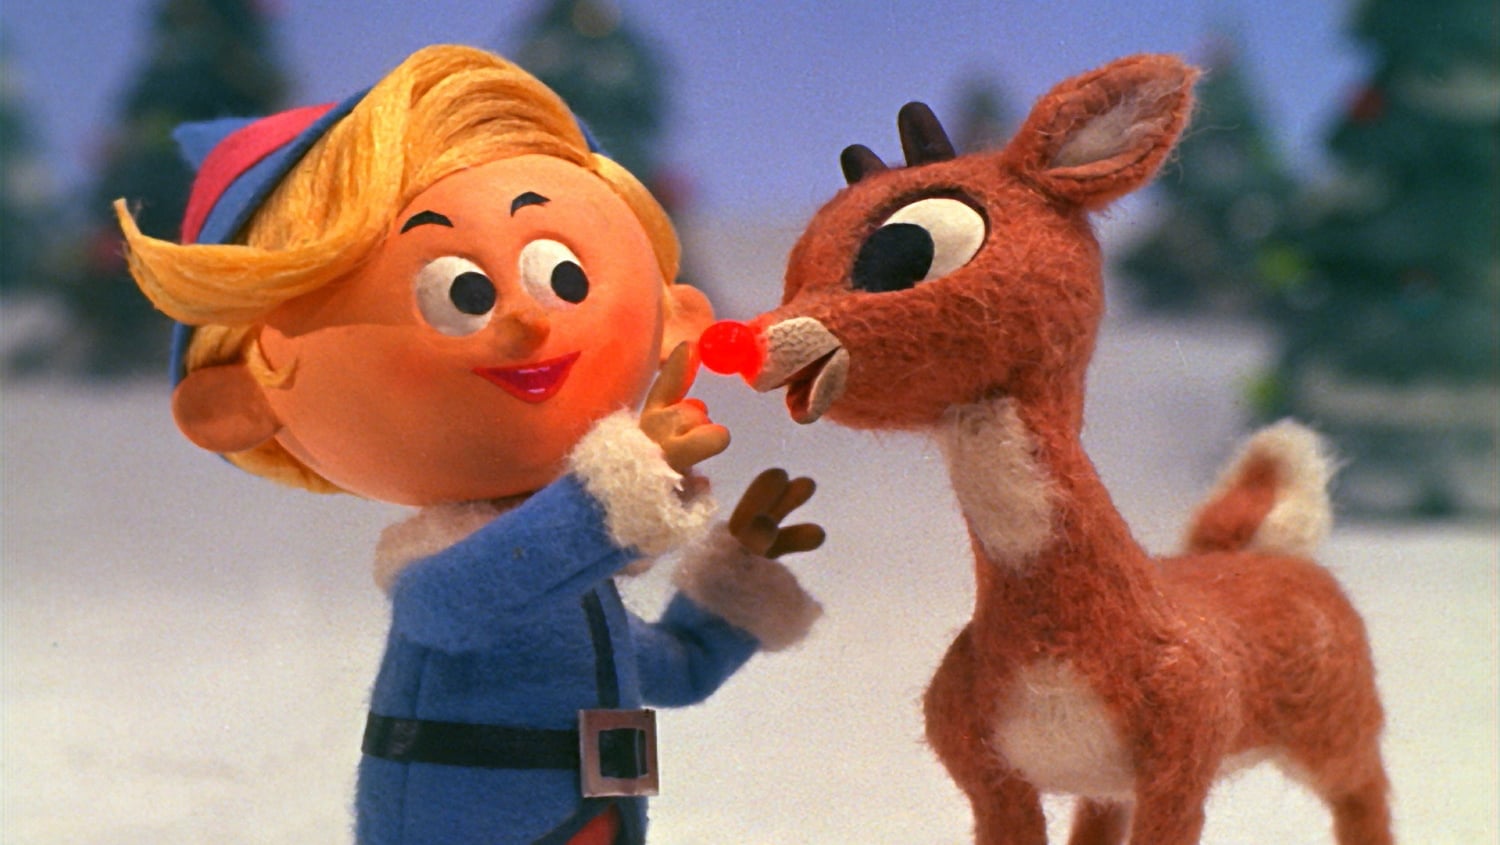 Rudolph the Red-Nosed Reindeer 1964 123movies